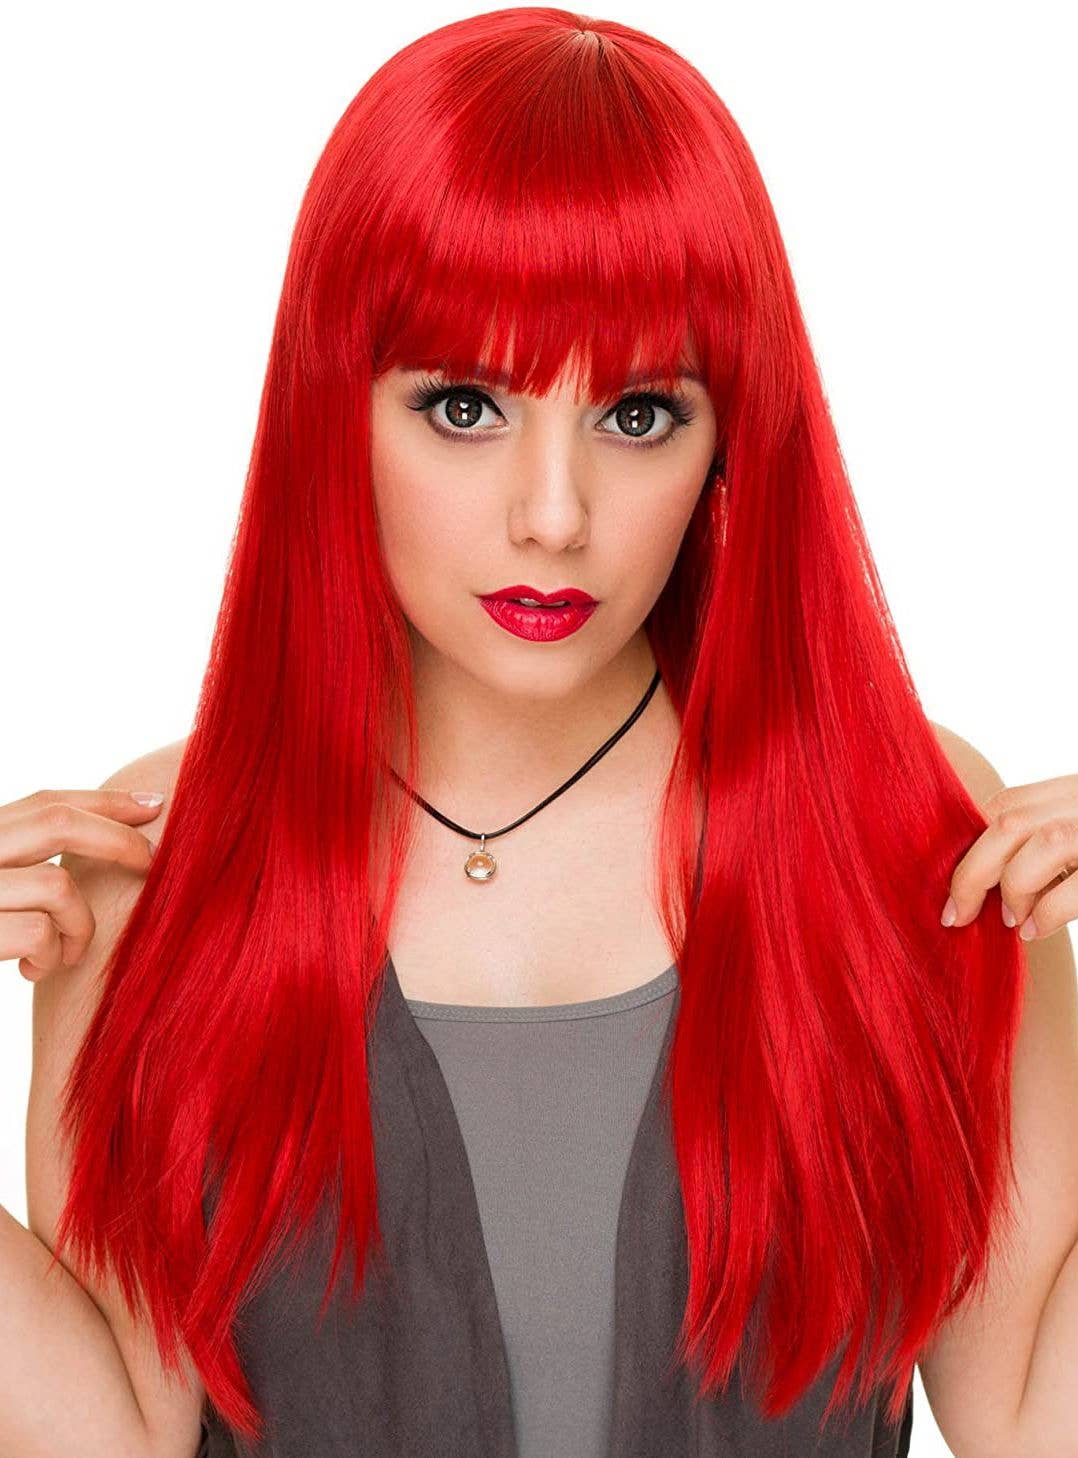 Straight Bright Red Wig with Fringe | Women's Long Red Wig by RockStar